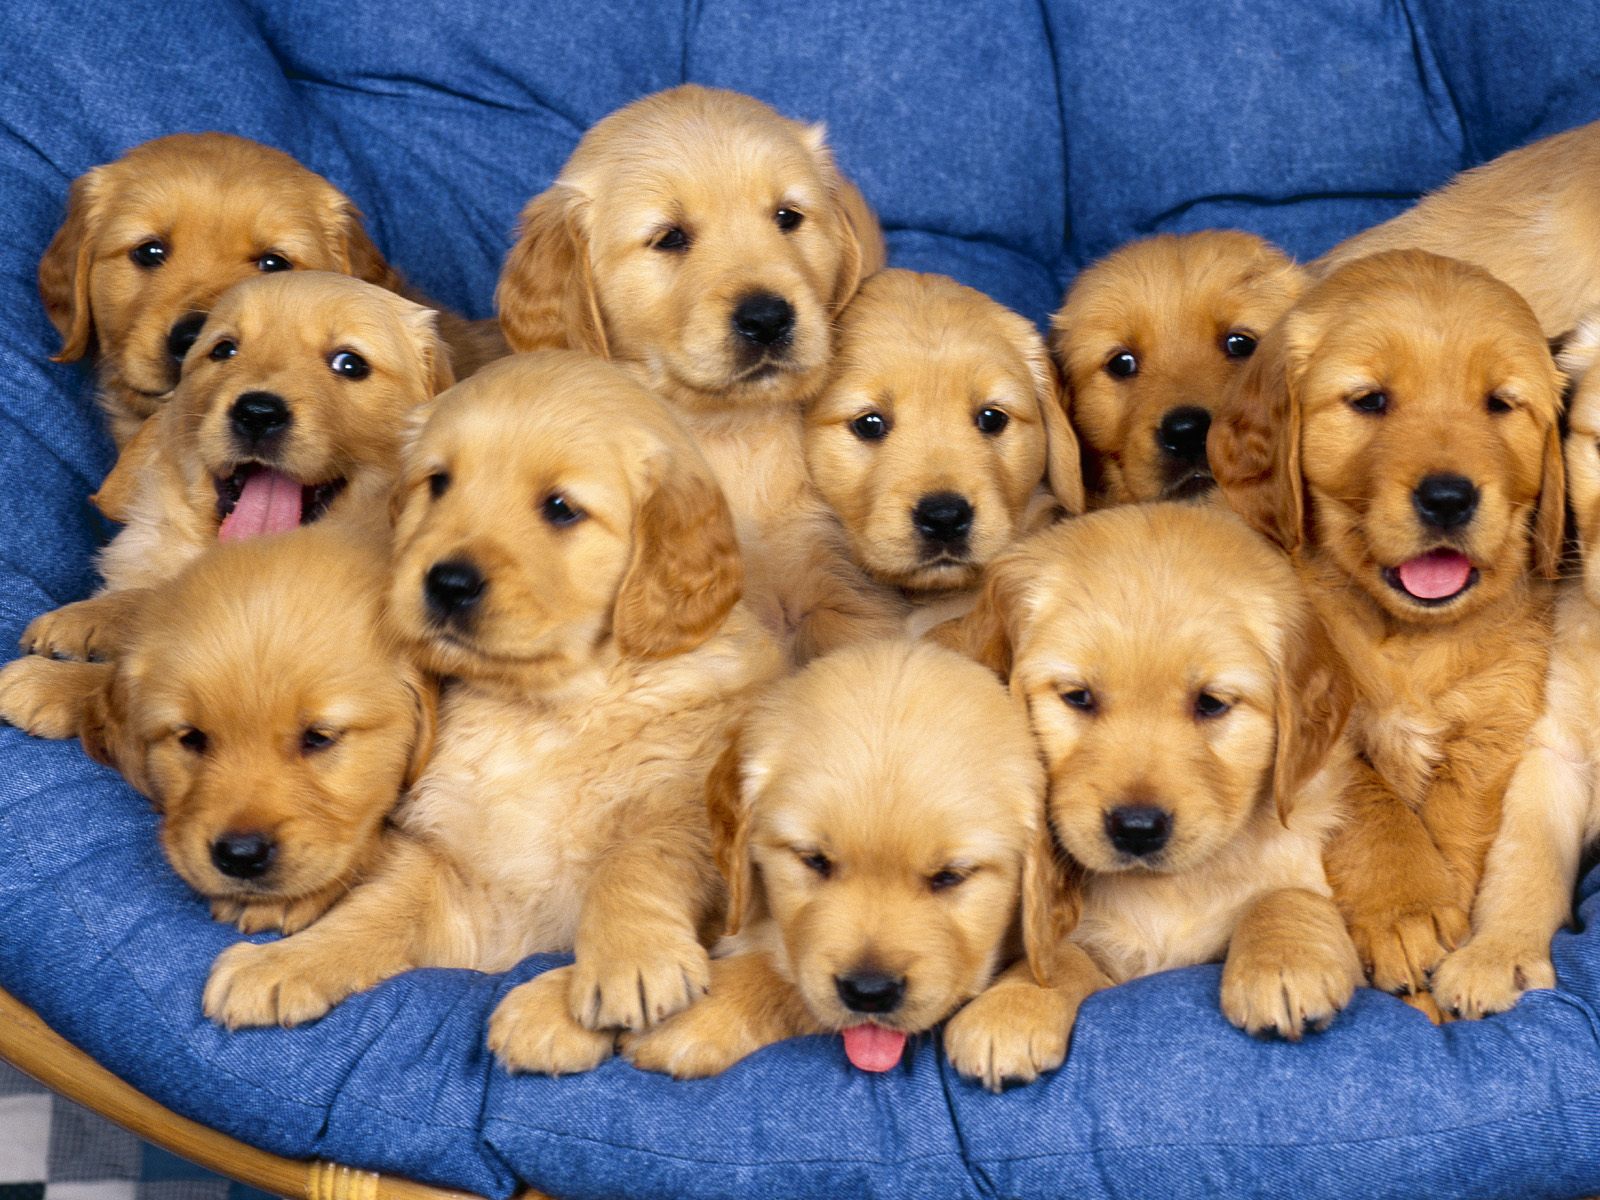 Dogs Food Stuff: Cute Puppy Wallpapers